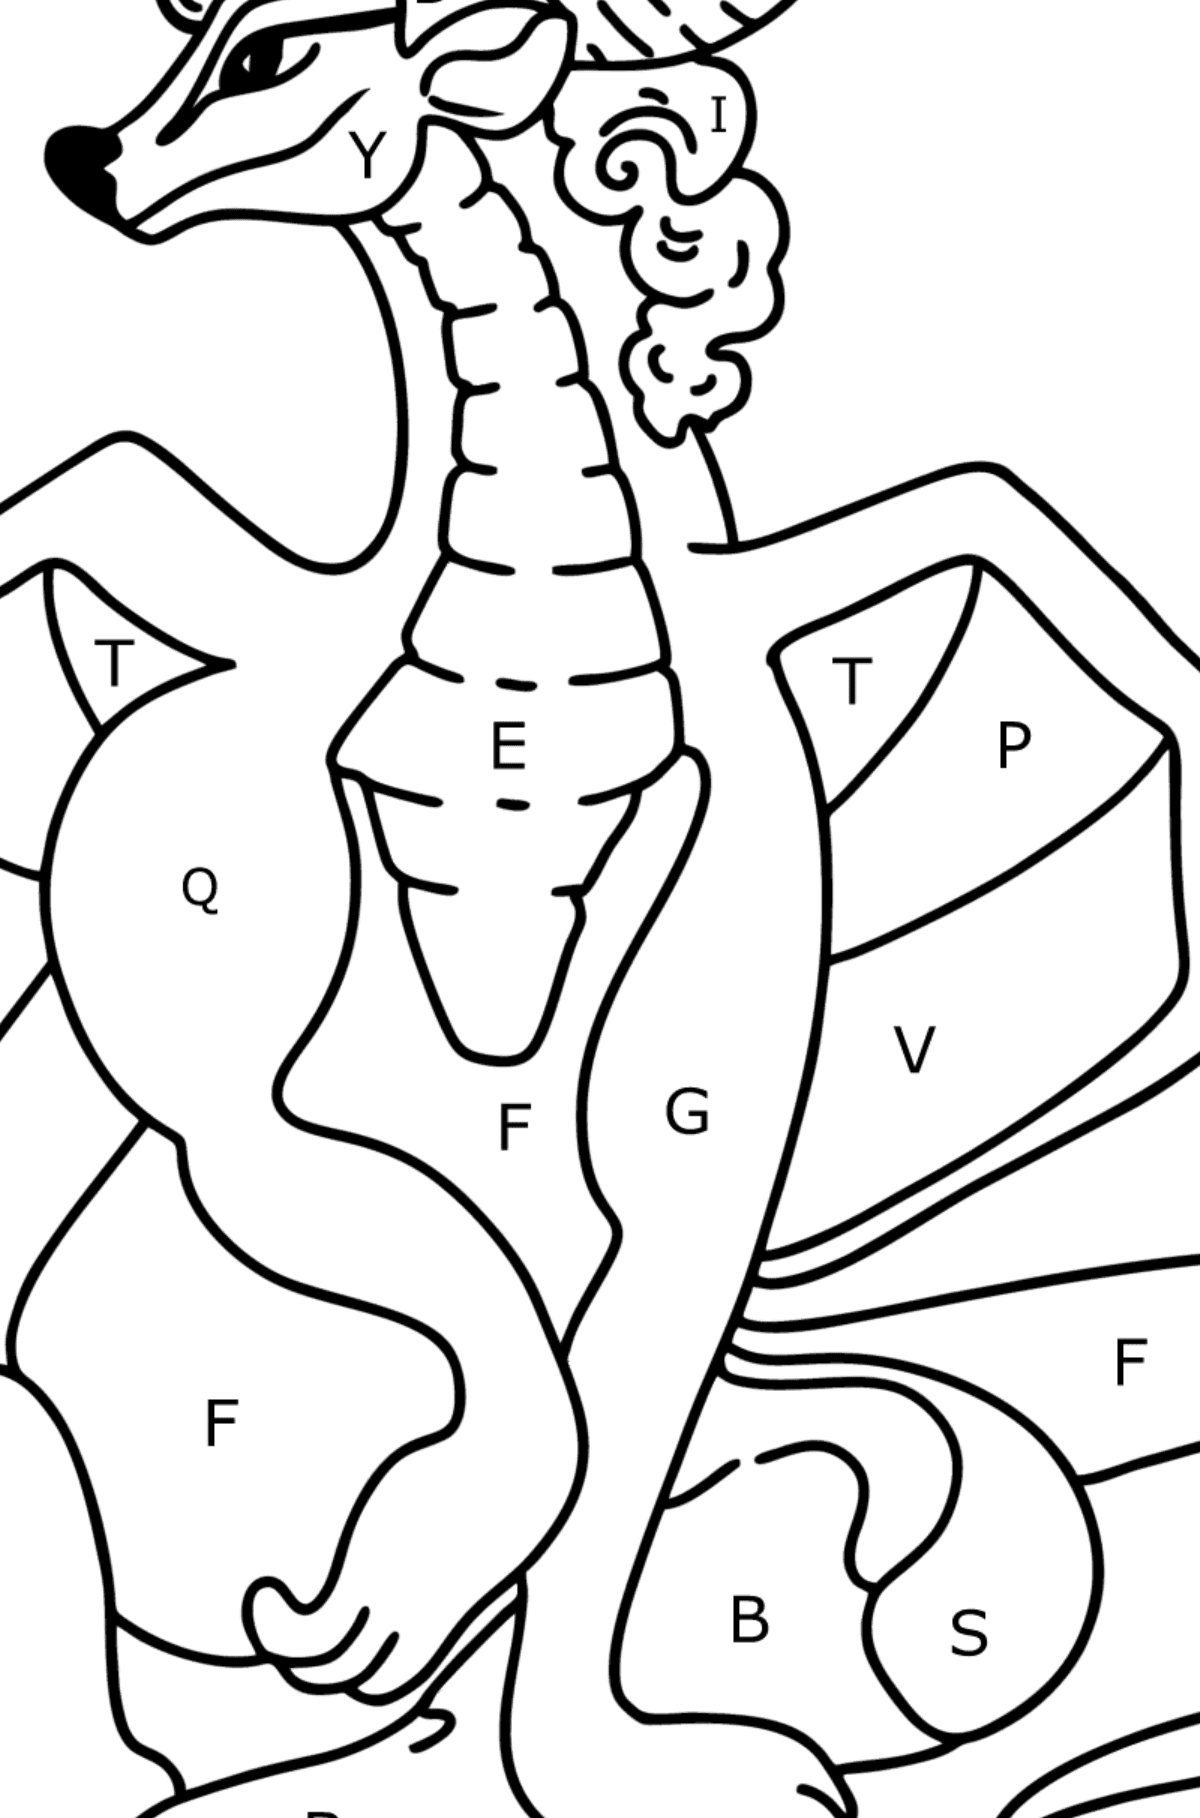 Happy Dragon coloring page - Coloring by Letters for Kids